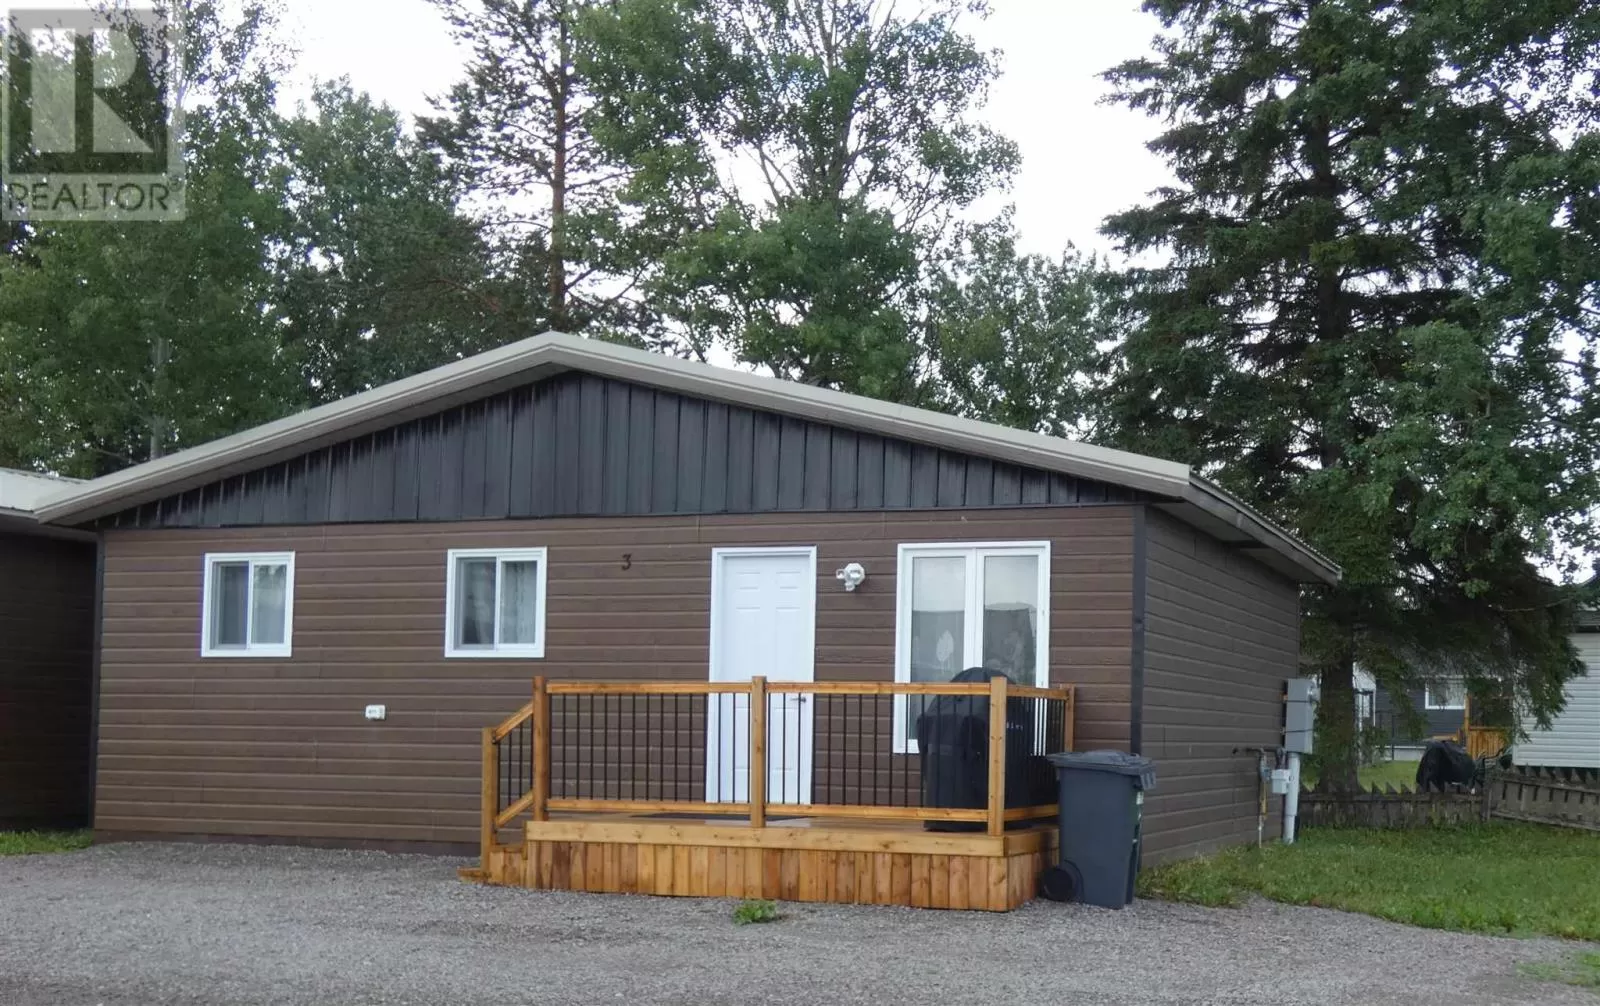 Multi-Family for rent: 127 Kenogami Road, Longlac, Ontario P0T 2A0